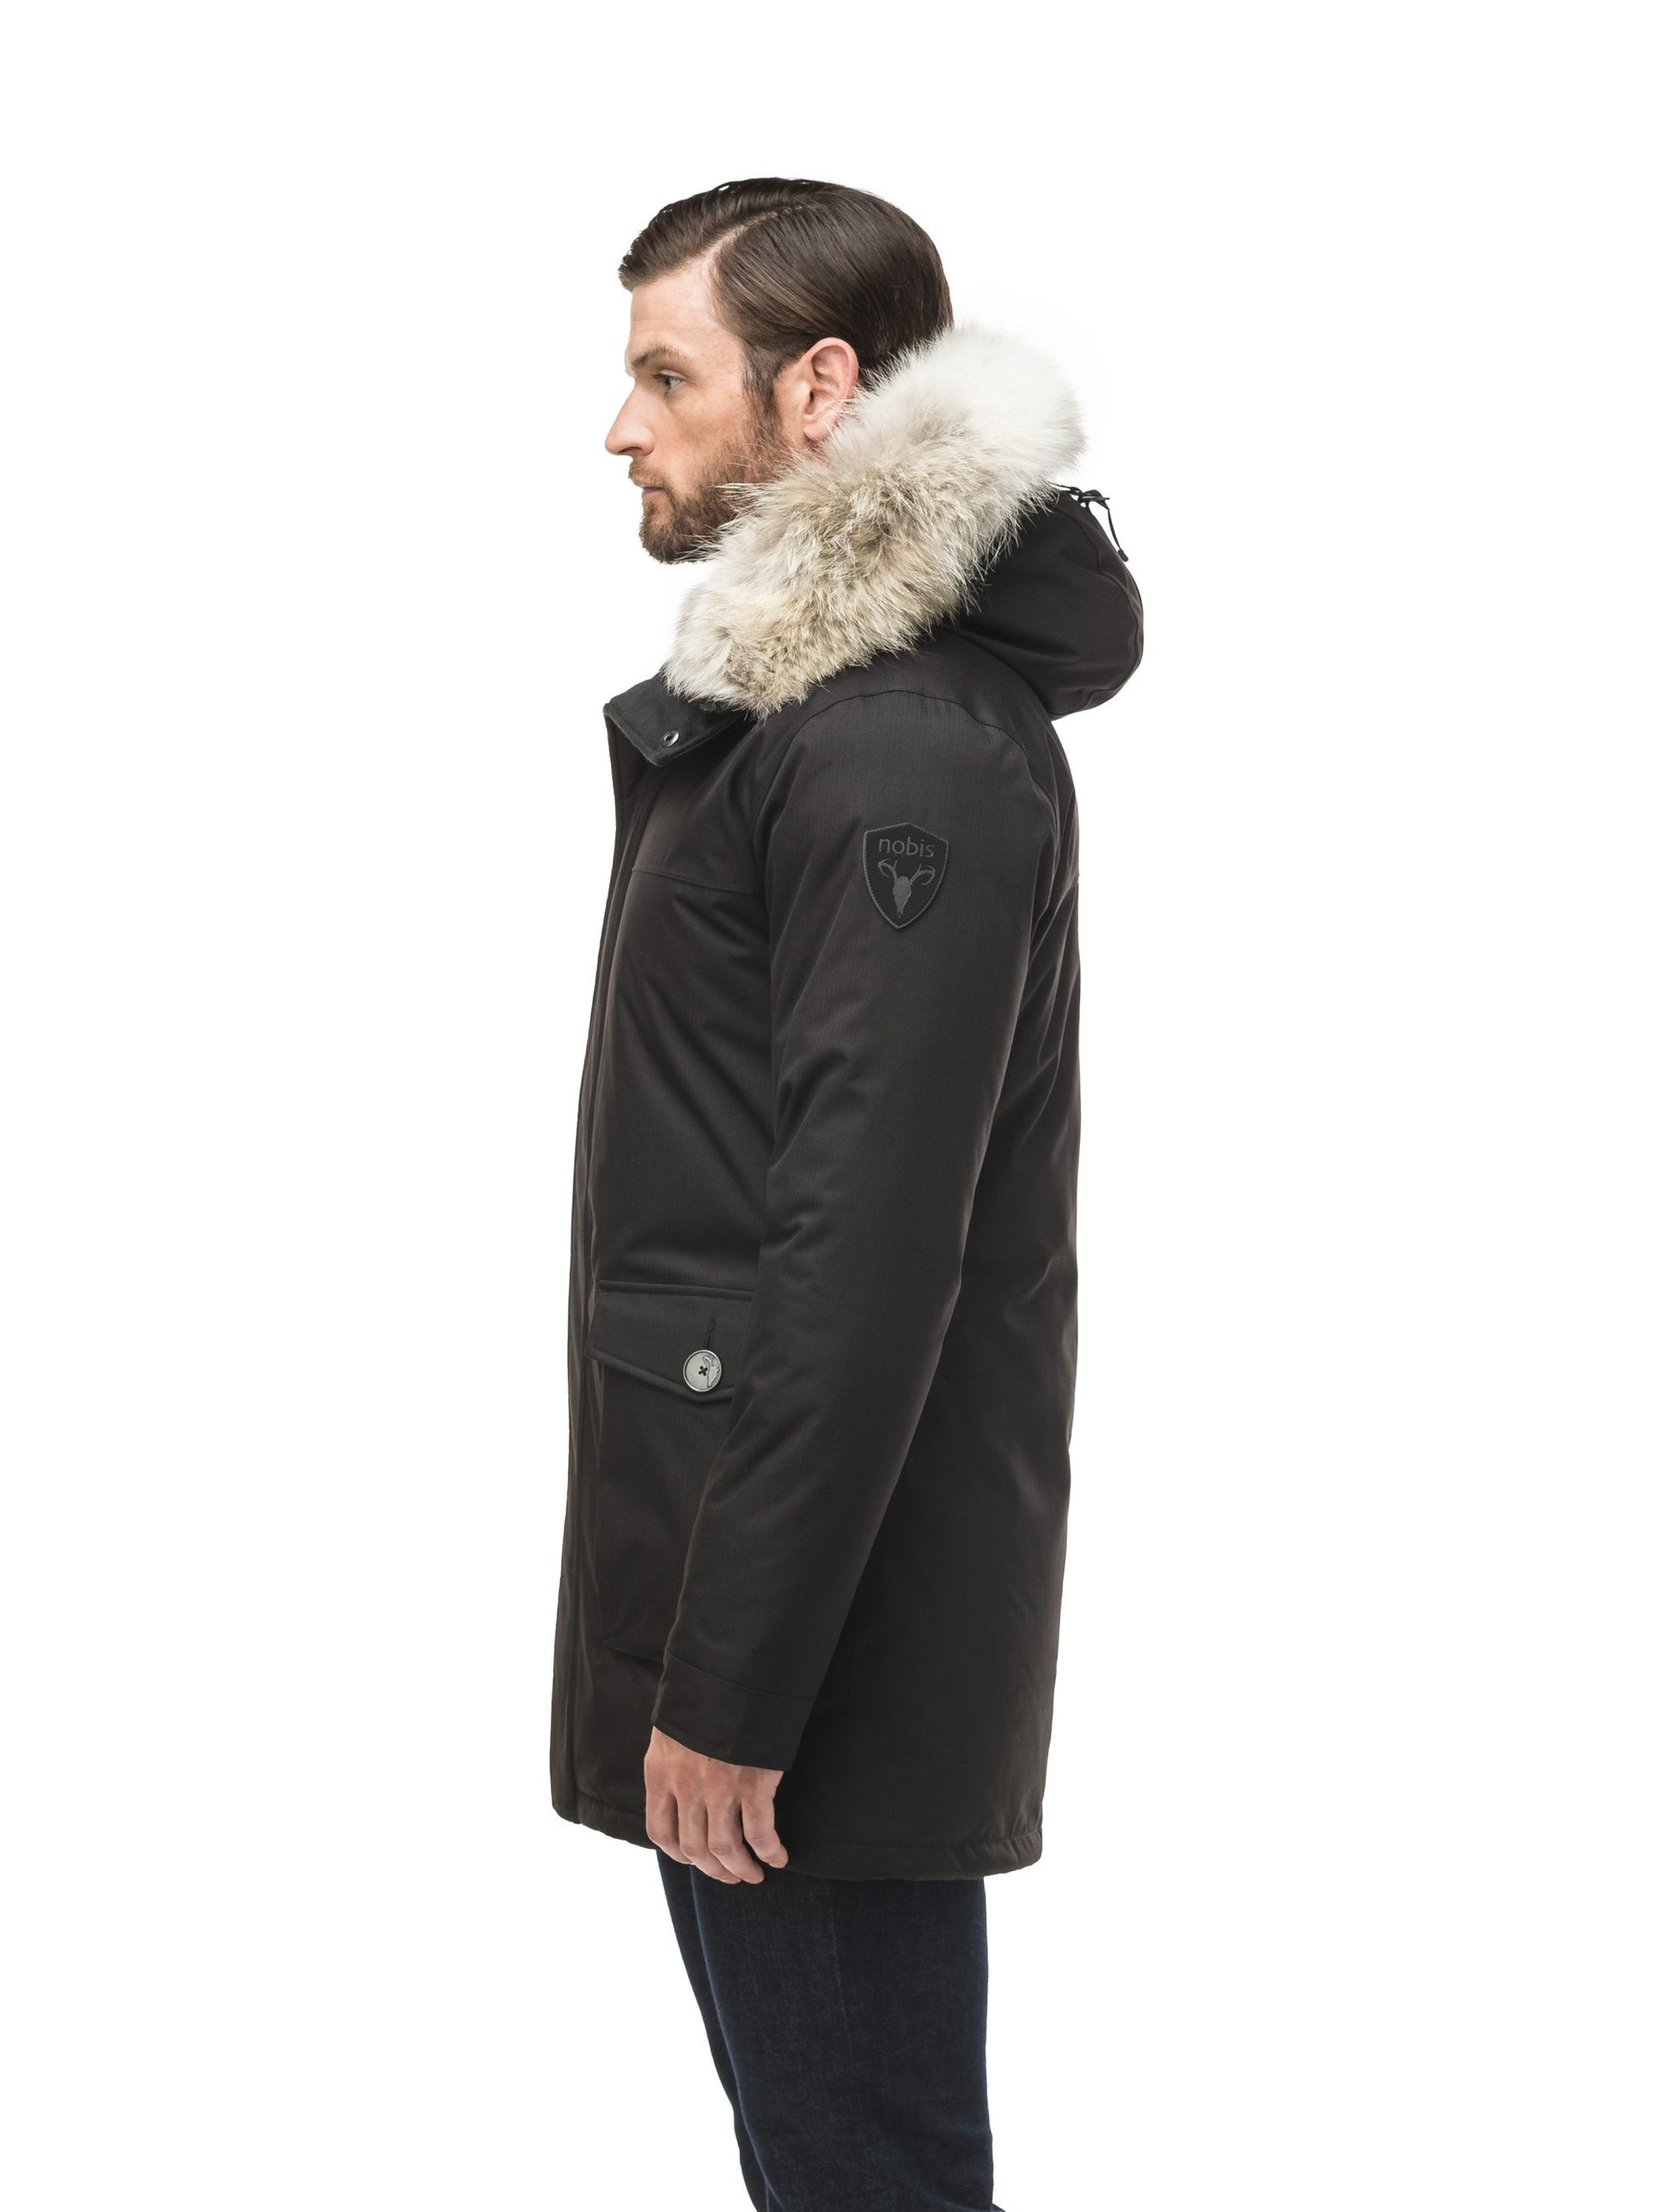 Men's slim fitting waist length parka with removable fur trim on the hood and two waist patch pockets in CH Black